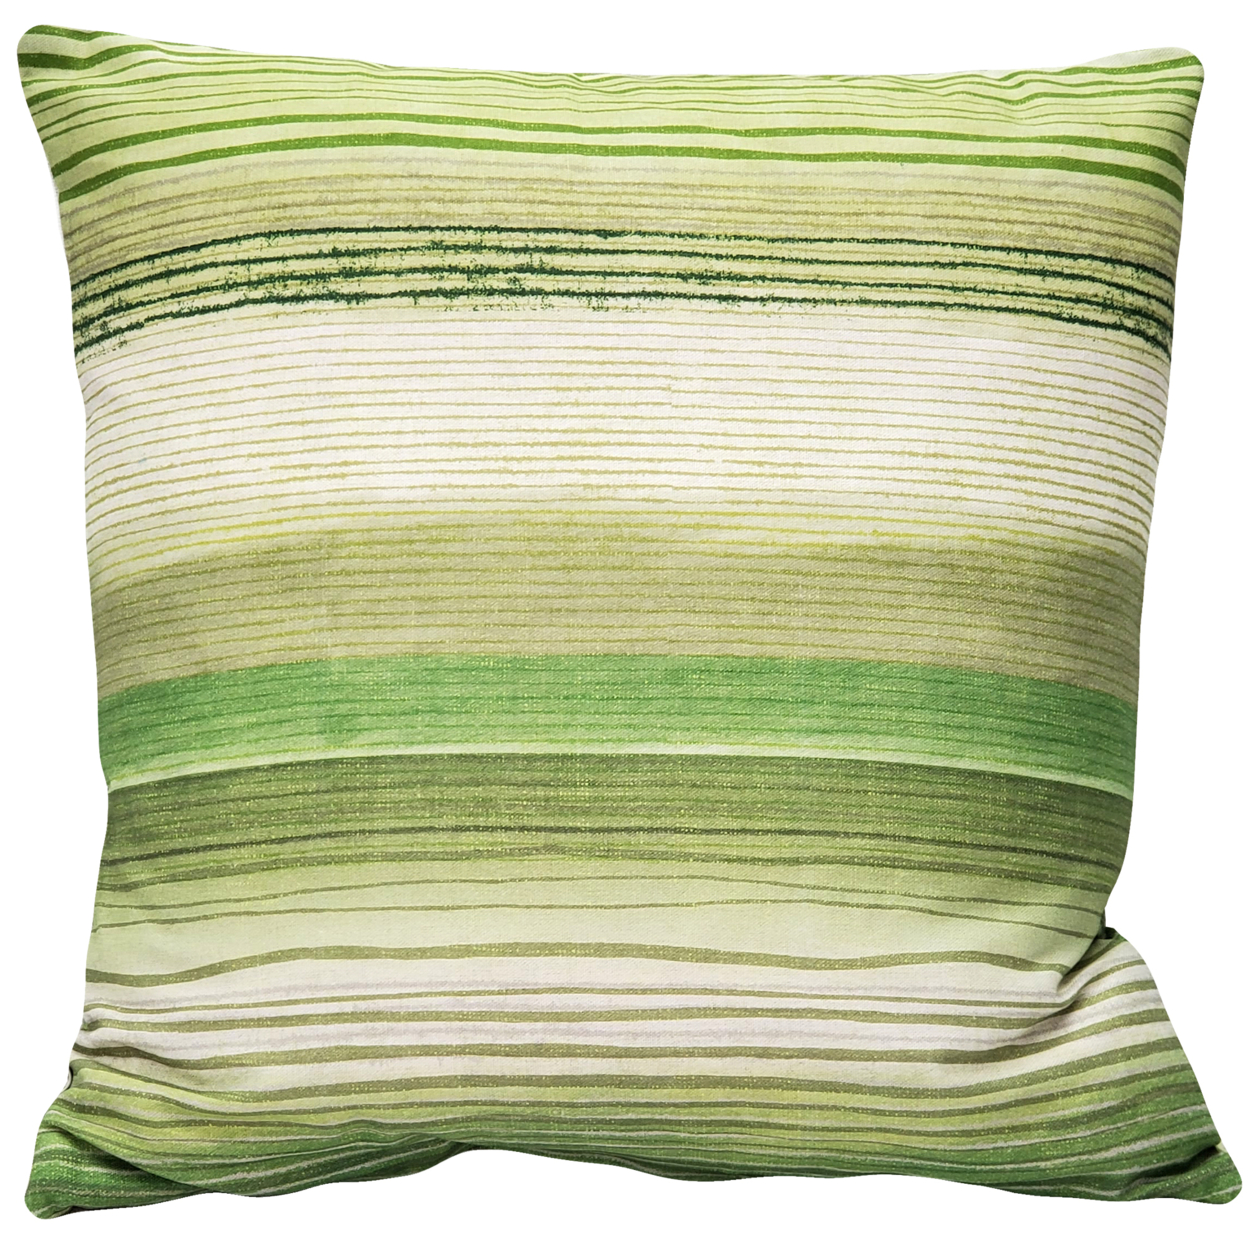 Sedona Stripes Green Throw Pillow 20x20 Inches Square, Complete Pillow With Polyfill Pillow Insert